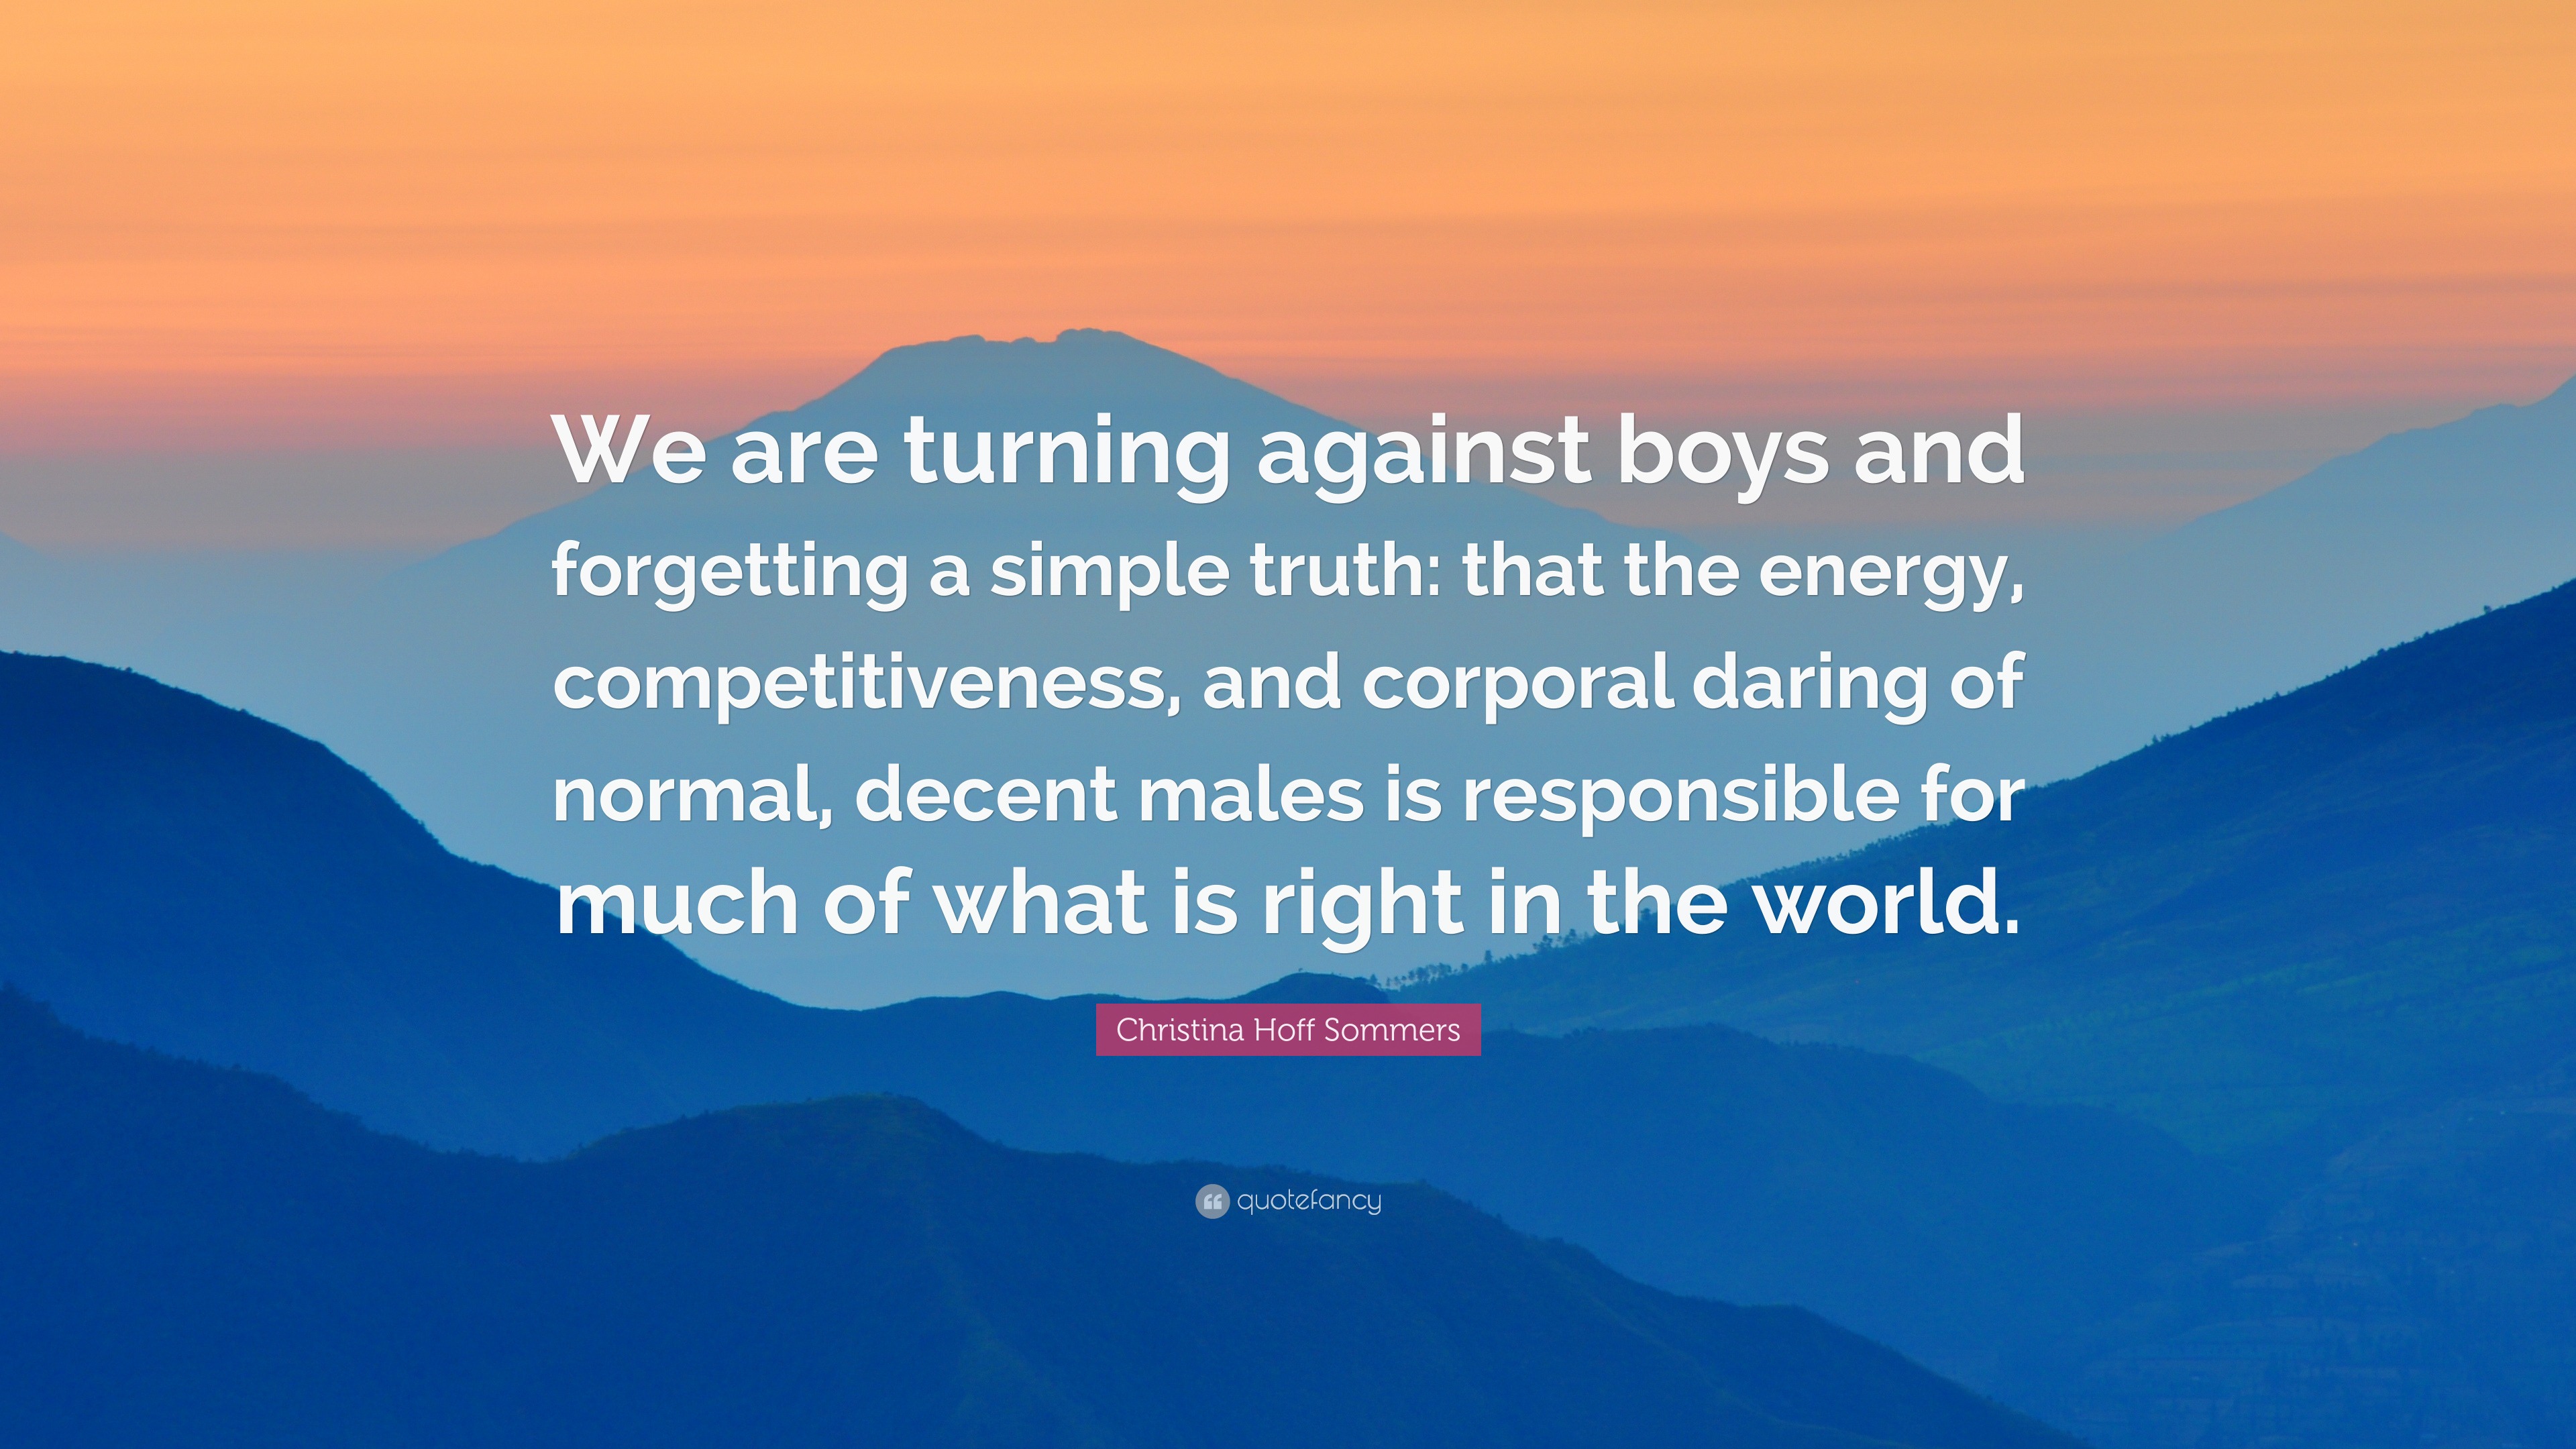 Christina Hoff Sommers Quote: “We are turning against boys and